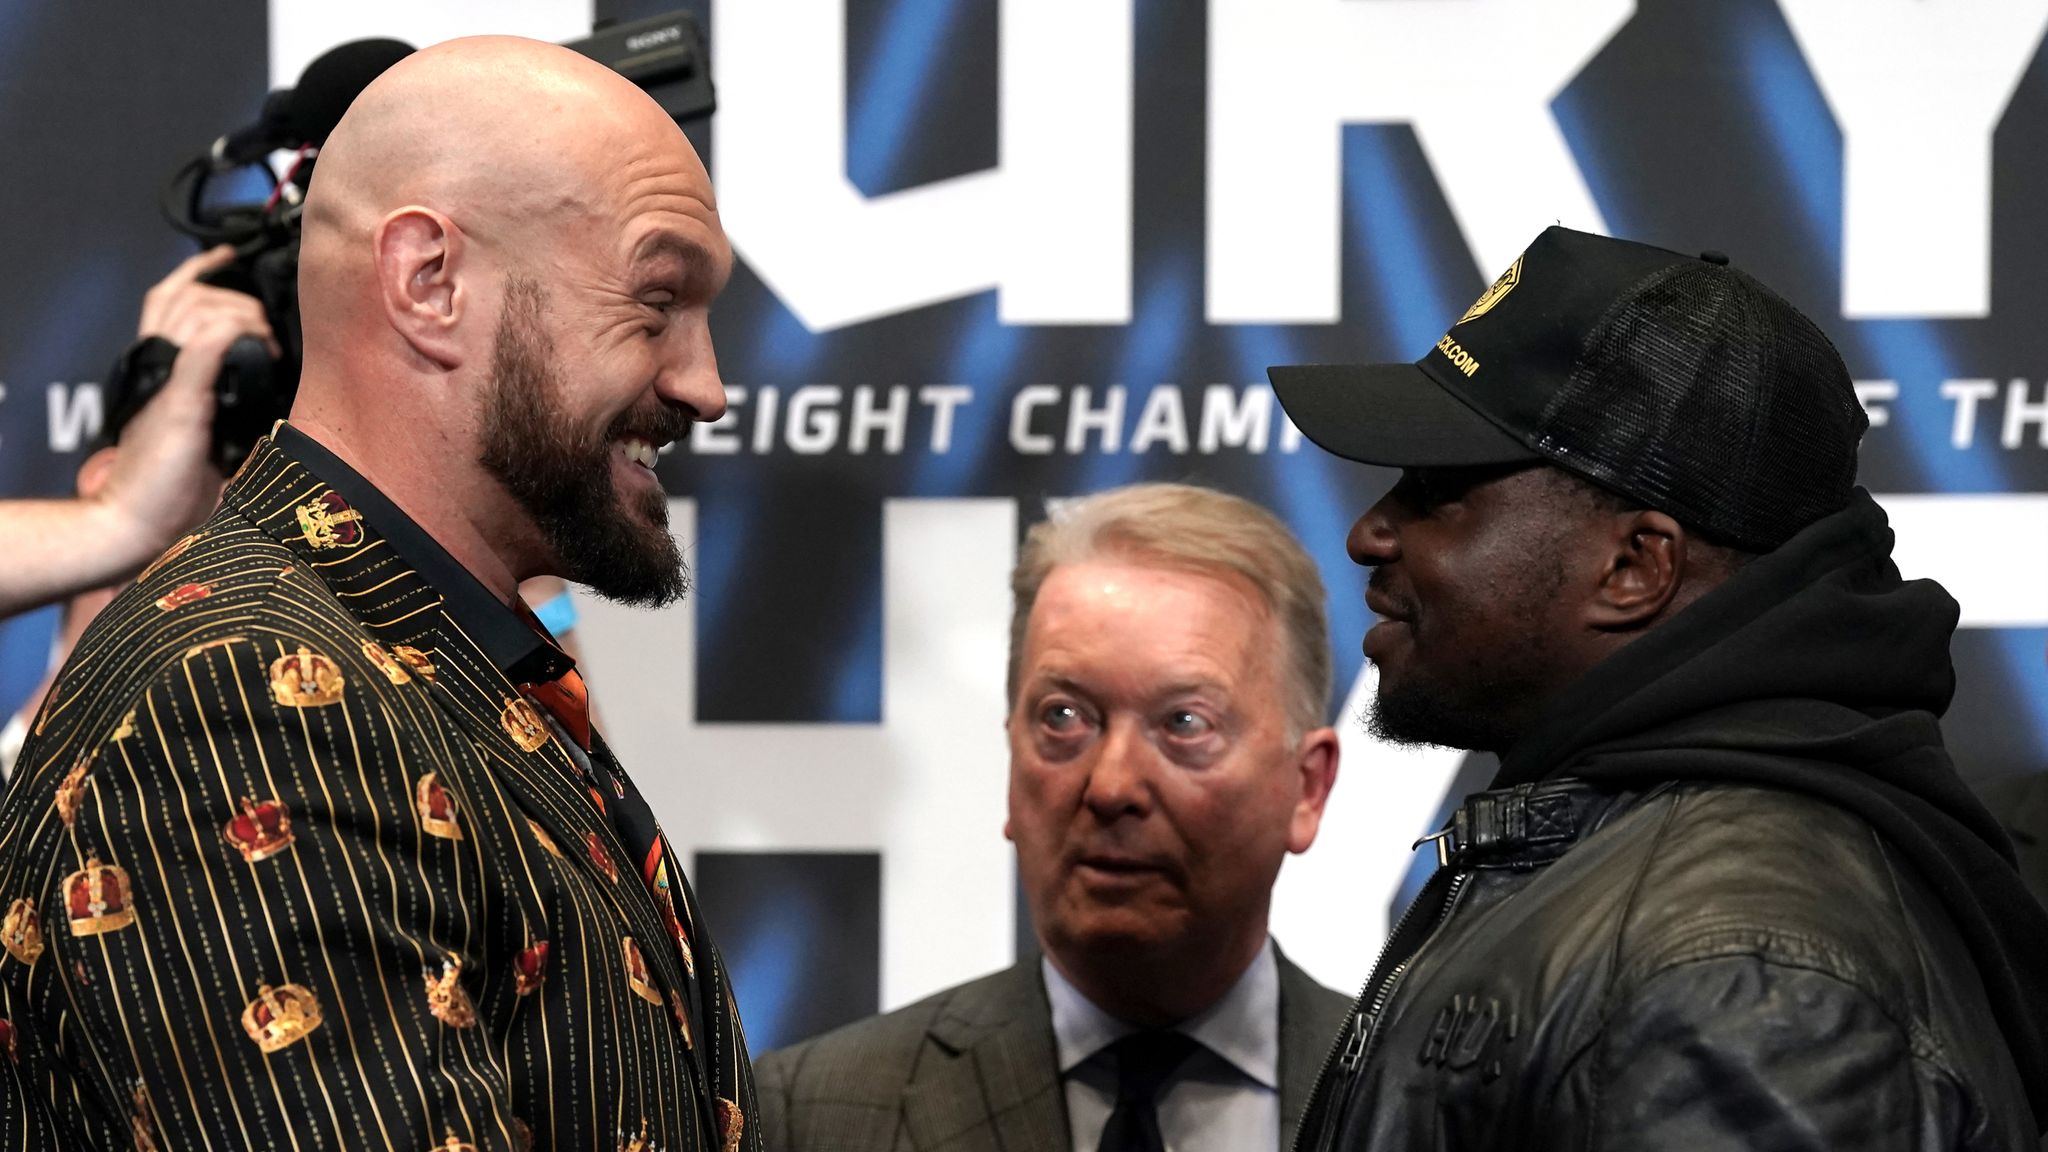 Tyson Fury vs Dillian Whyte Teams clash during face-off after amicable Wembley Stadium news conference Boxing News Sky Sports